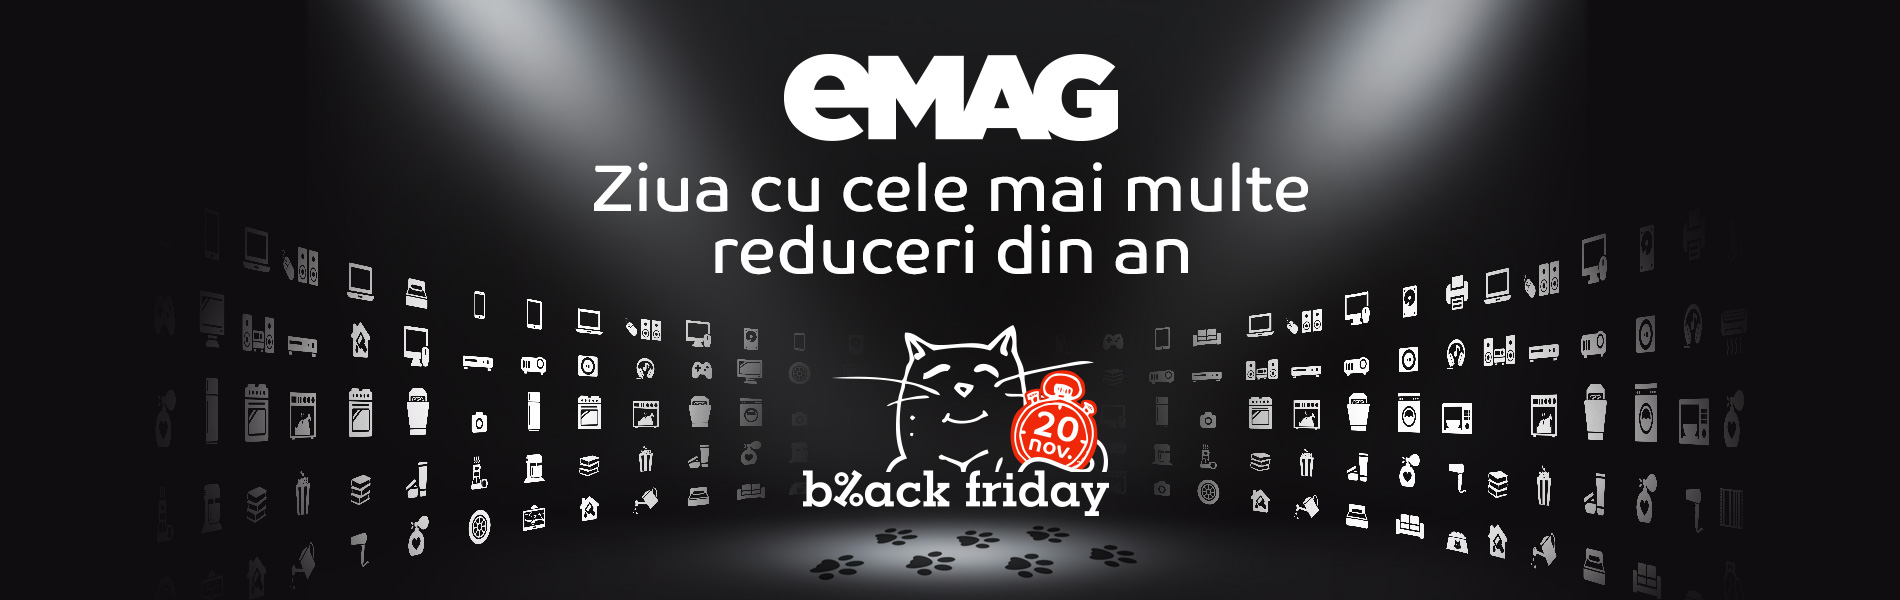 emag day discounts